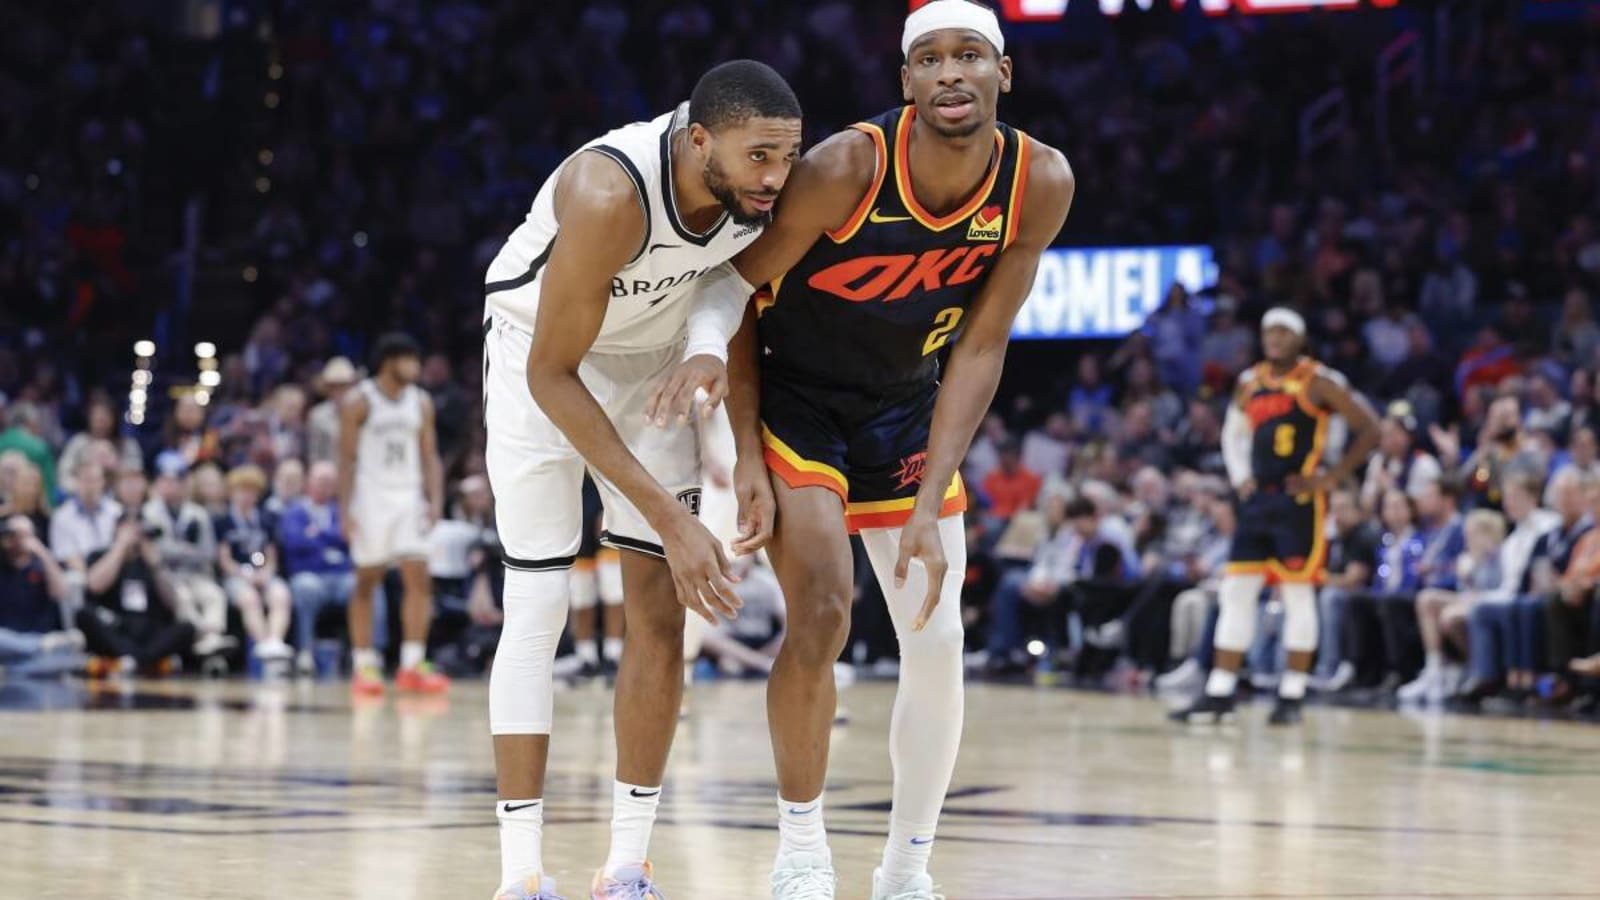 Mikal Bridges and Cam Johnson give their insights about why Shai Gilgeous-Alexander is hard to defend